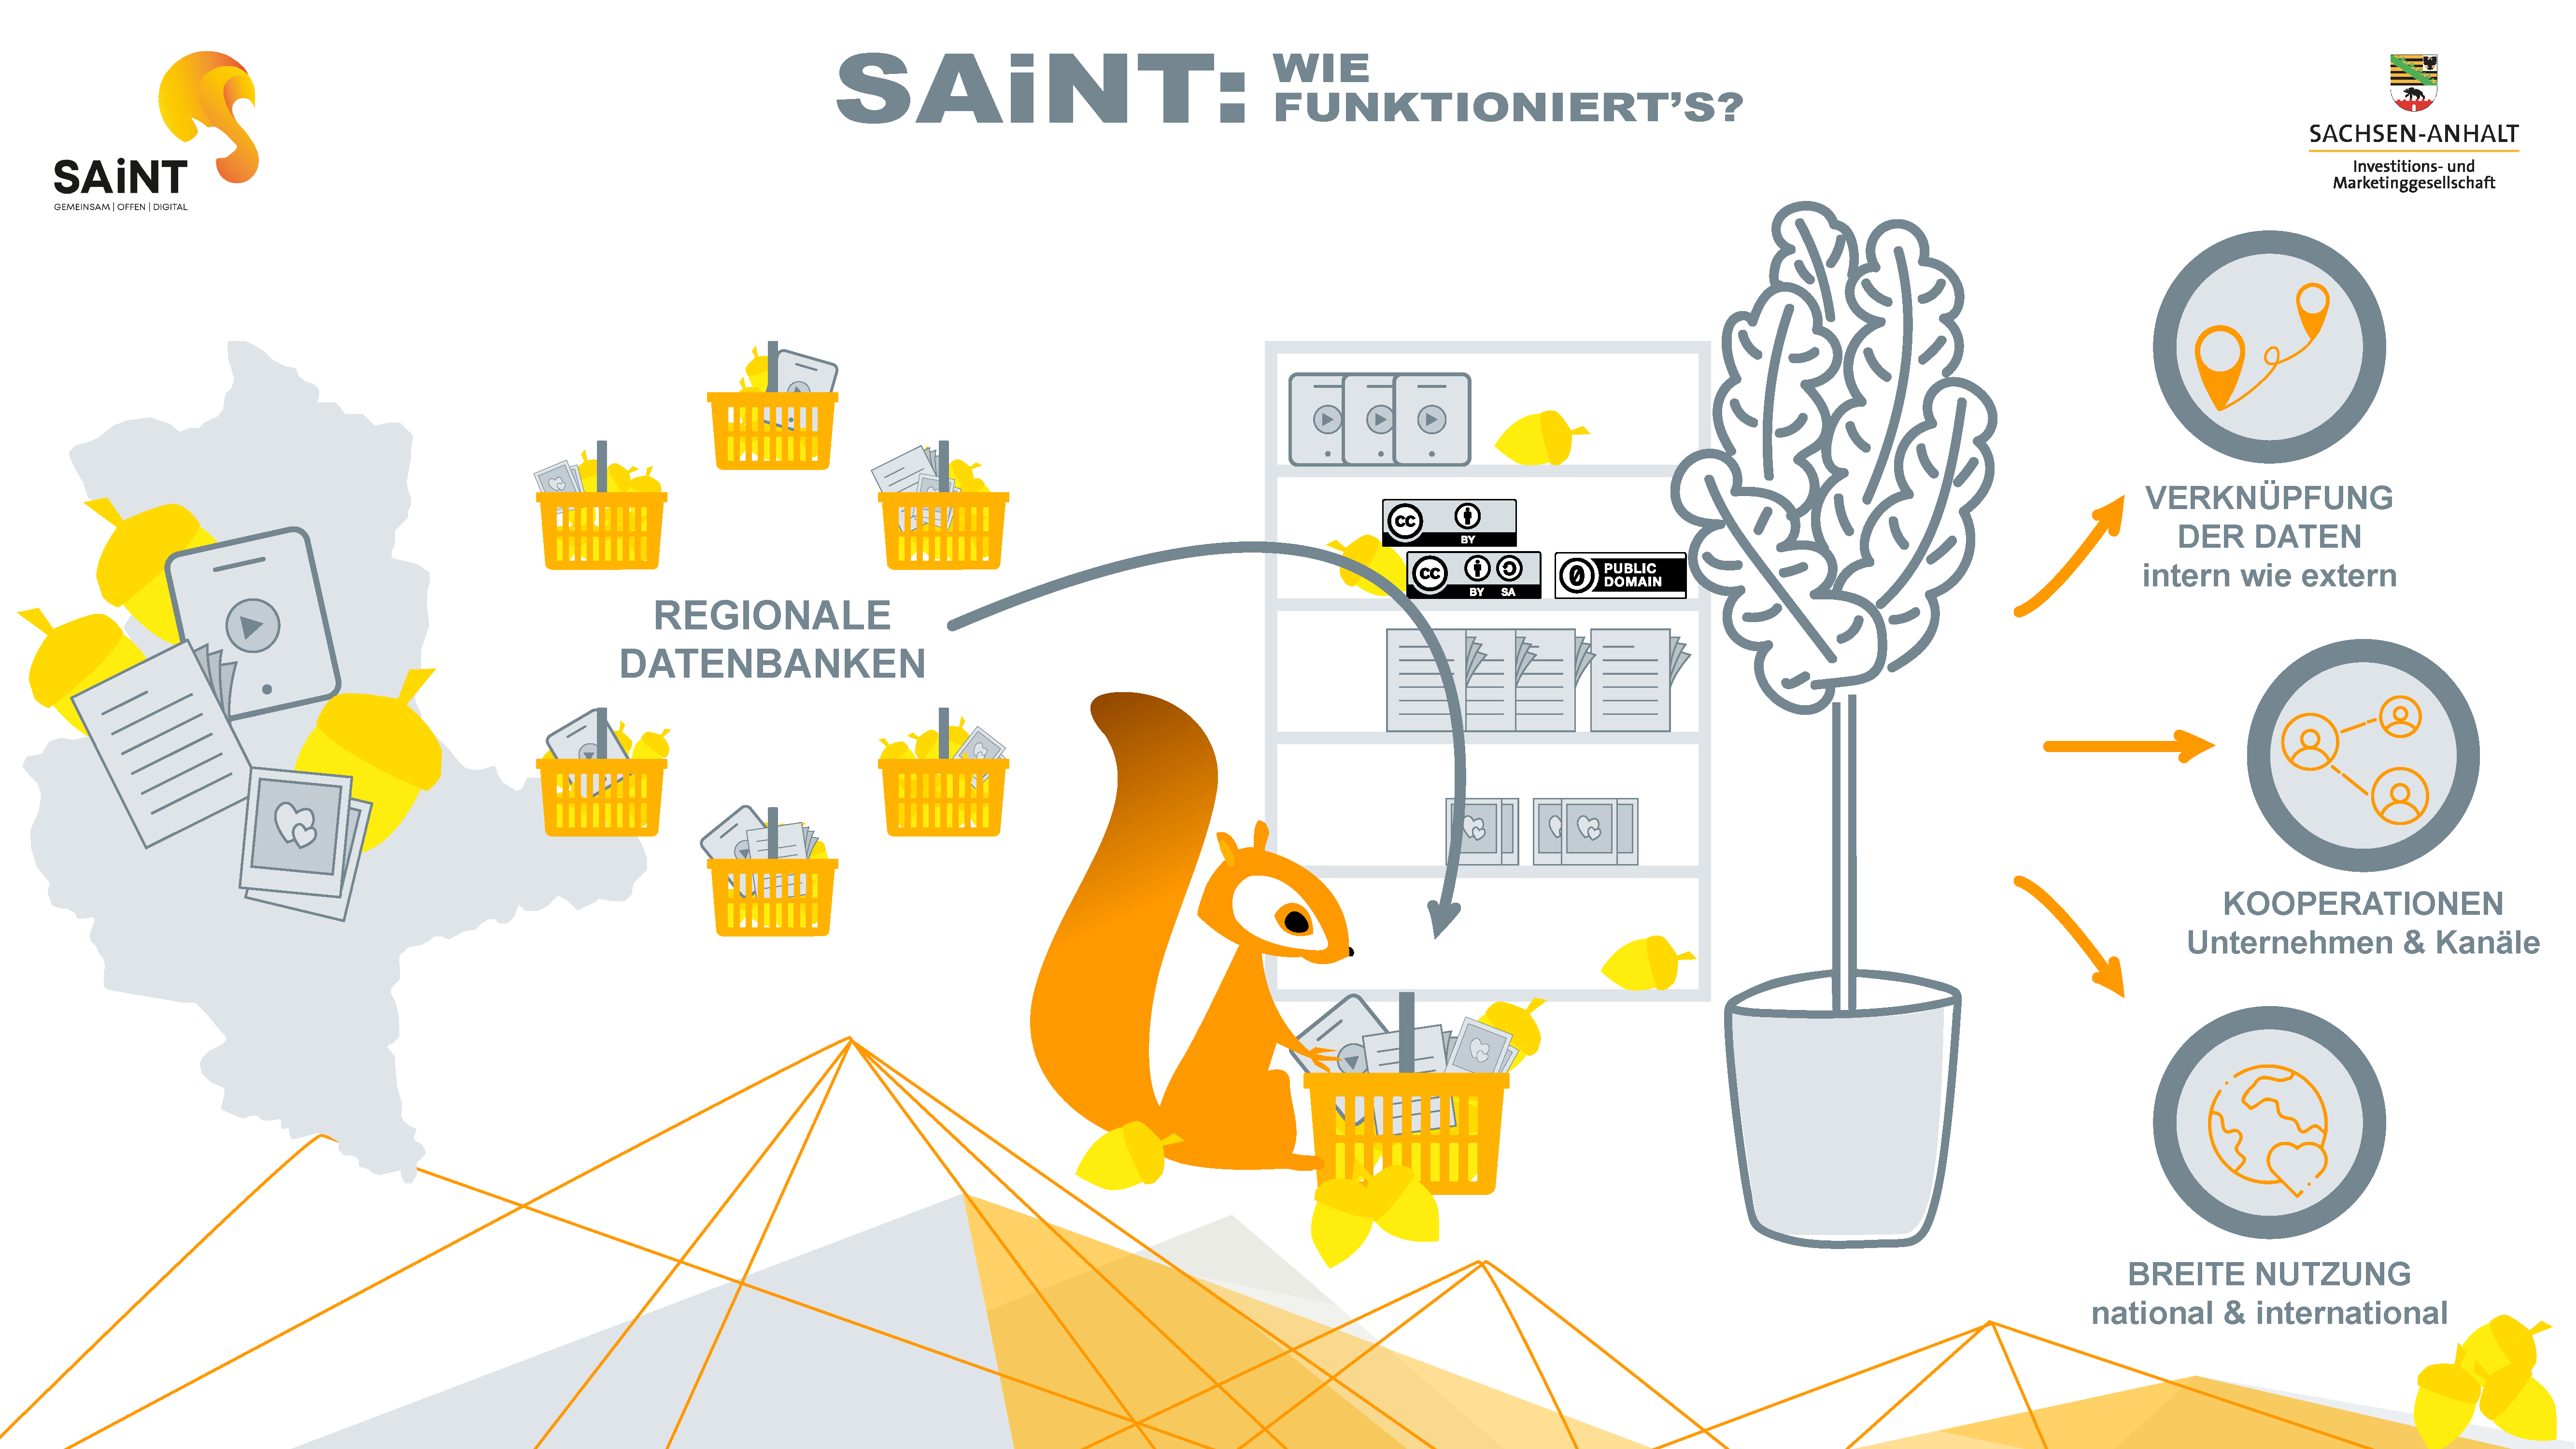 Schematic view of the function of SAiNT. The various databases are shown on the left, in the middle our squirrel mascot collectes the data from them and sorts them in a shelf with Creative Commons licenses, so as to process them on the right. The right side shows different possible processes: linking existing data internally and externally; cooperation of companies on the basis of SAiNT data; wide national and international use.